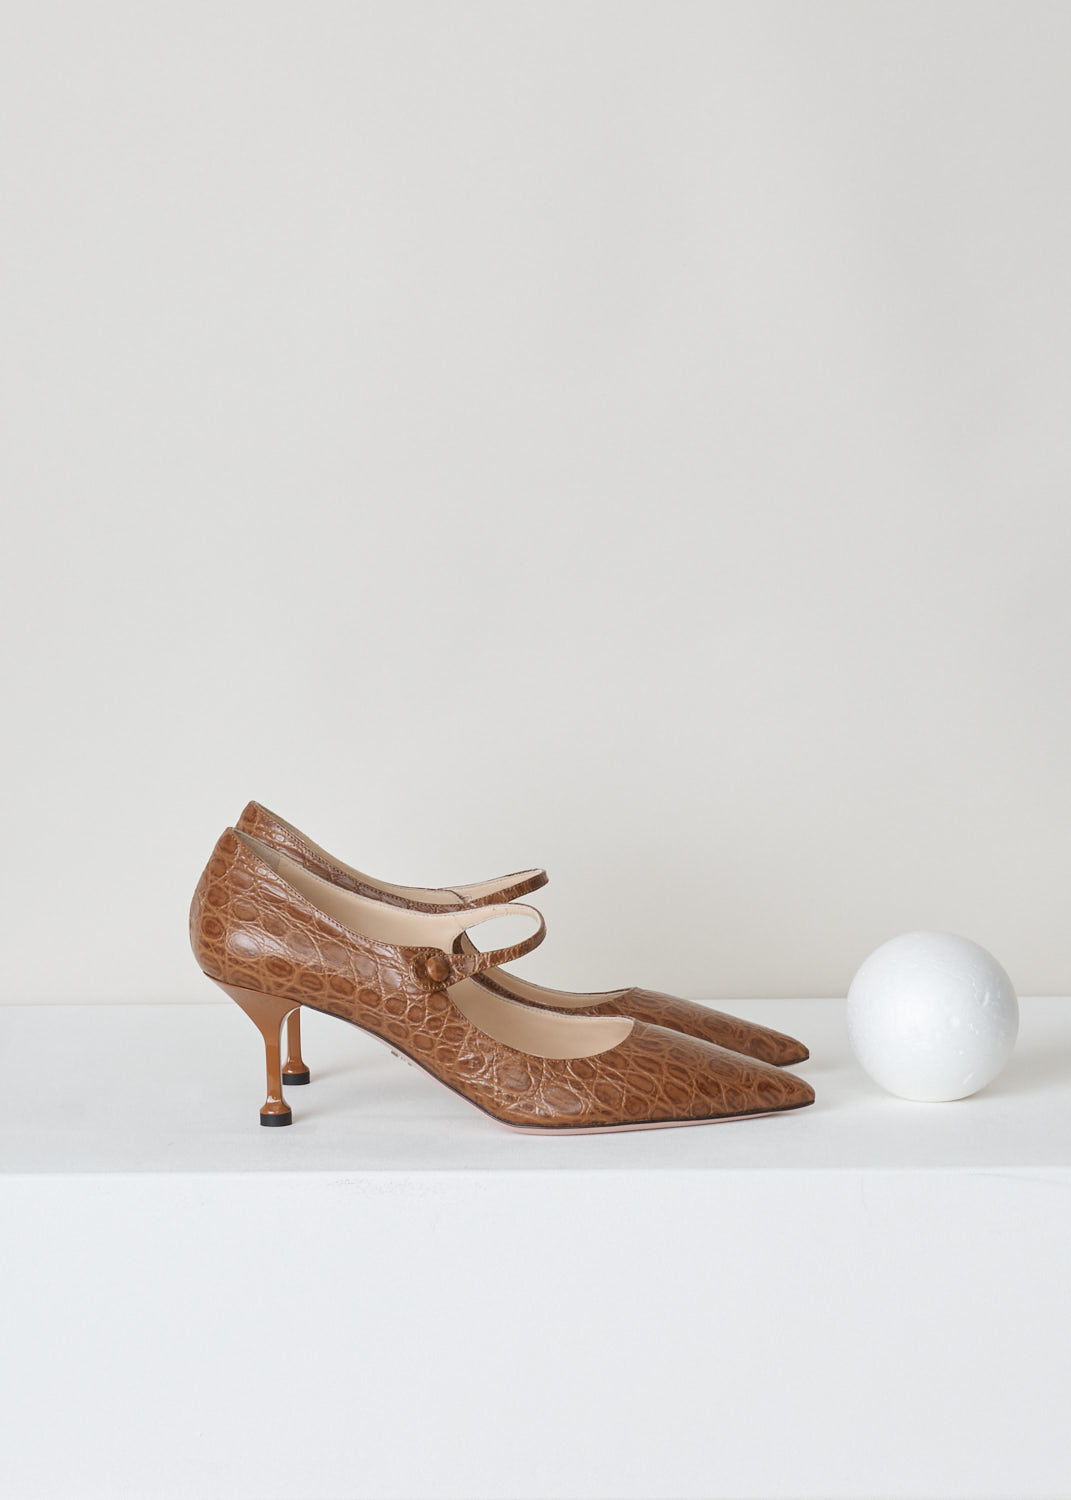 Prada, Croc-embossed leather mary jane pumps, ST_cocco_1I491L_F0314_visone, brown, side, Croc-embossed pumps featuring pointed toes and short stiletto heels. Also a leather strip crossing the vamp hold the foot in place. 

Heel height: 7 cm / 2.75 inch. 